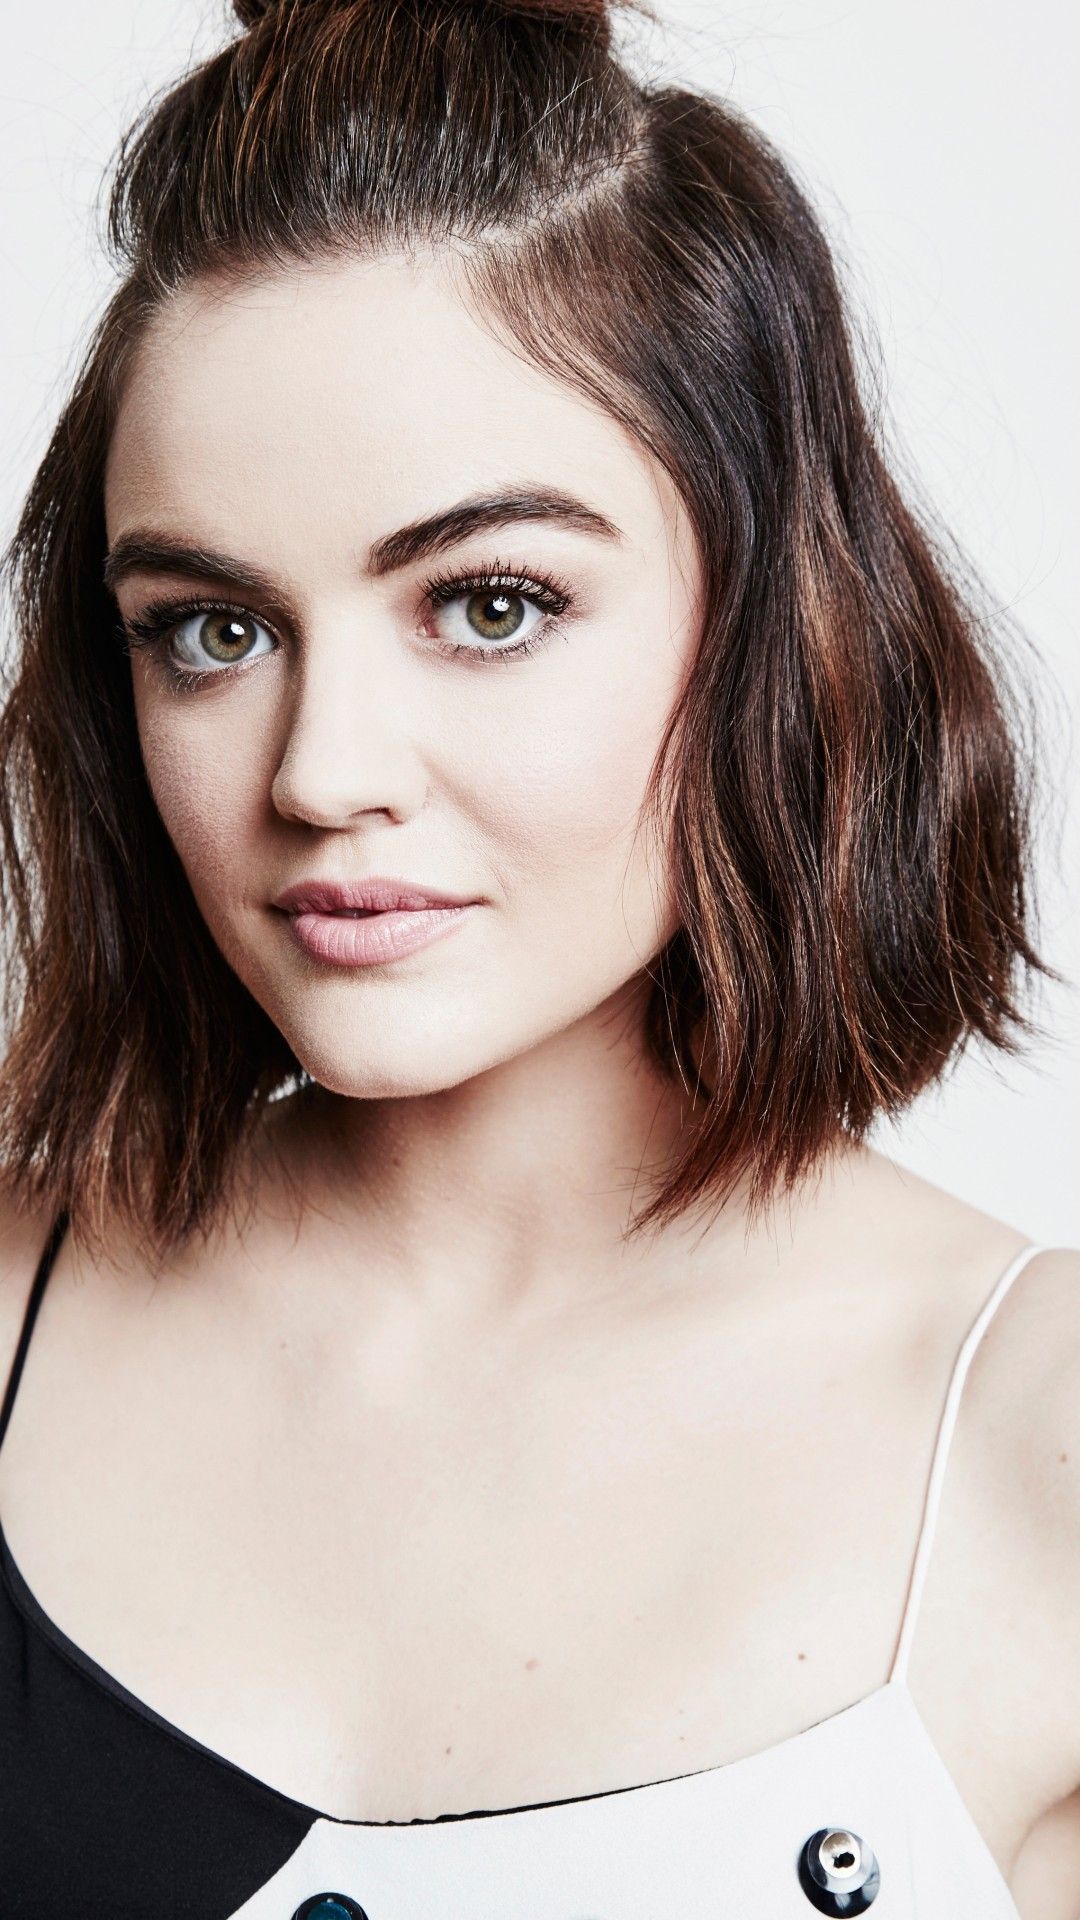 Download 1080x1920 Lucy Hale, Singer, Green Eyes, Actress, Face